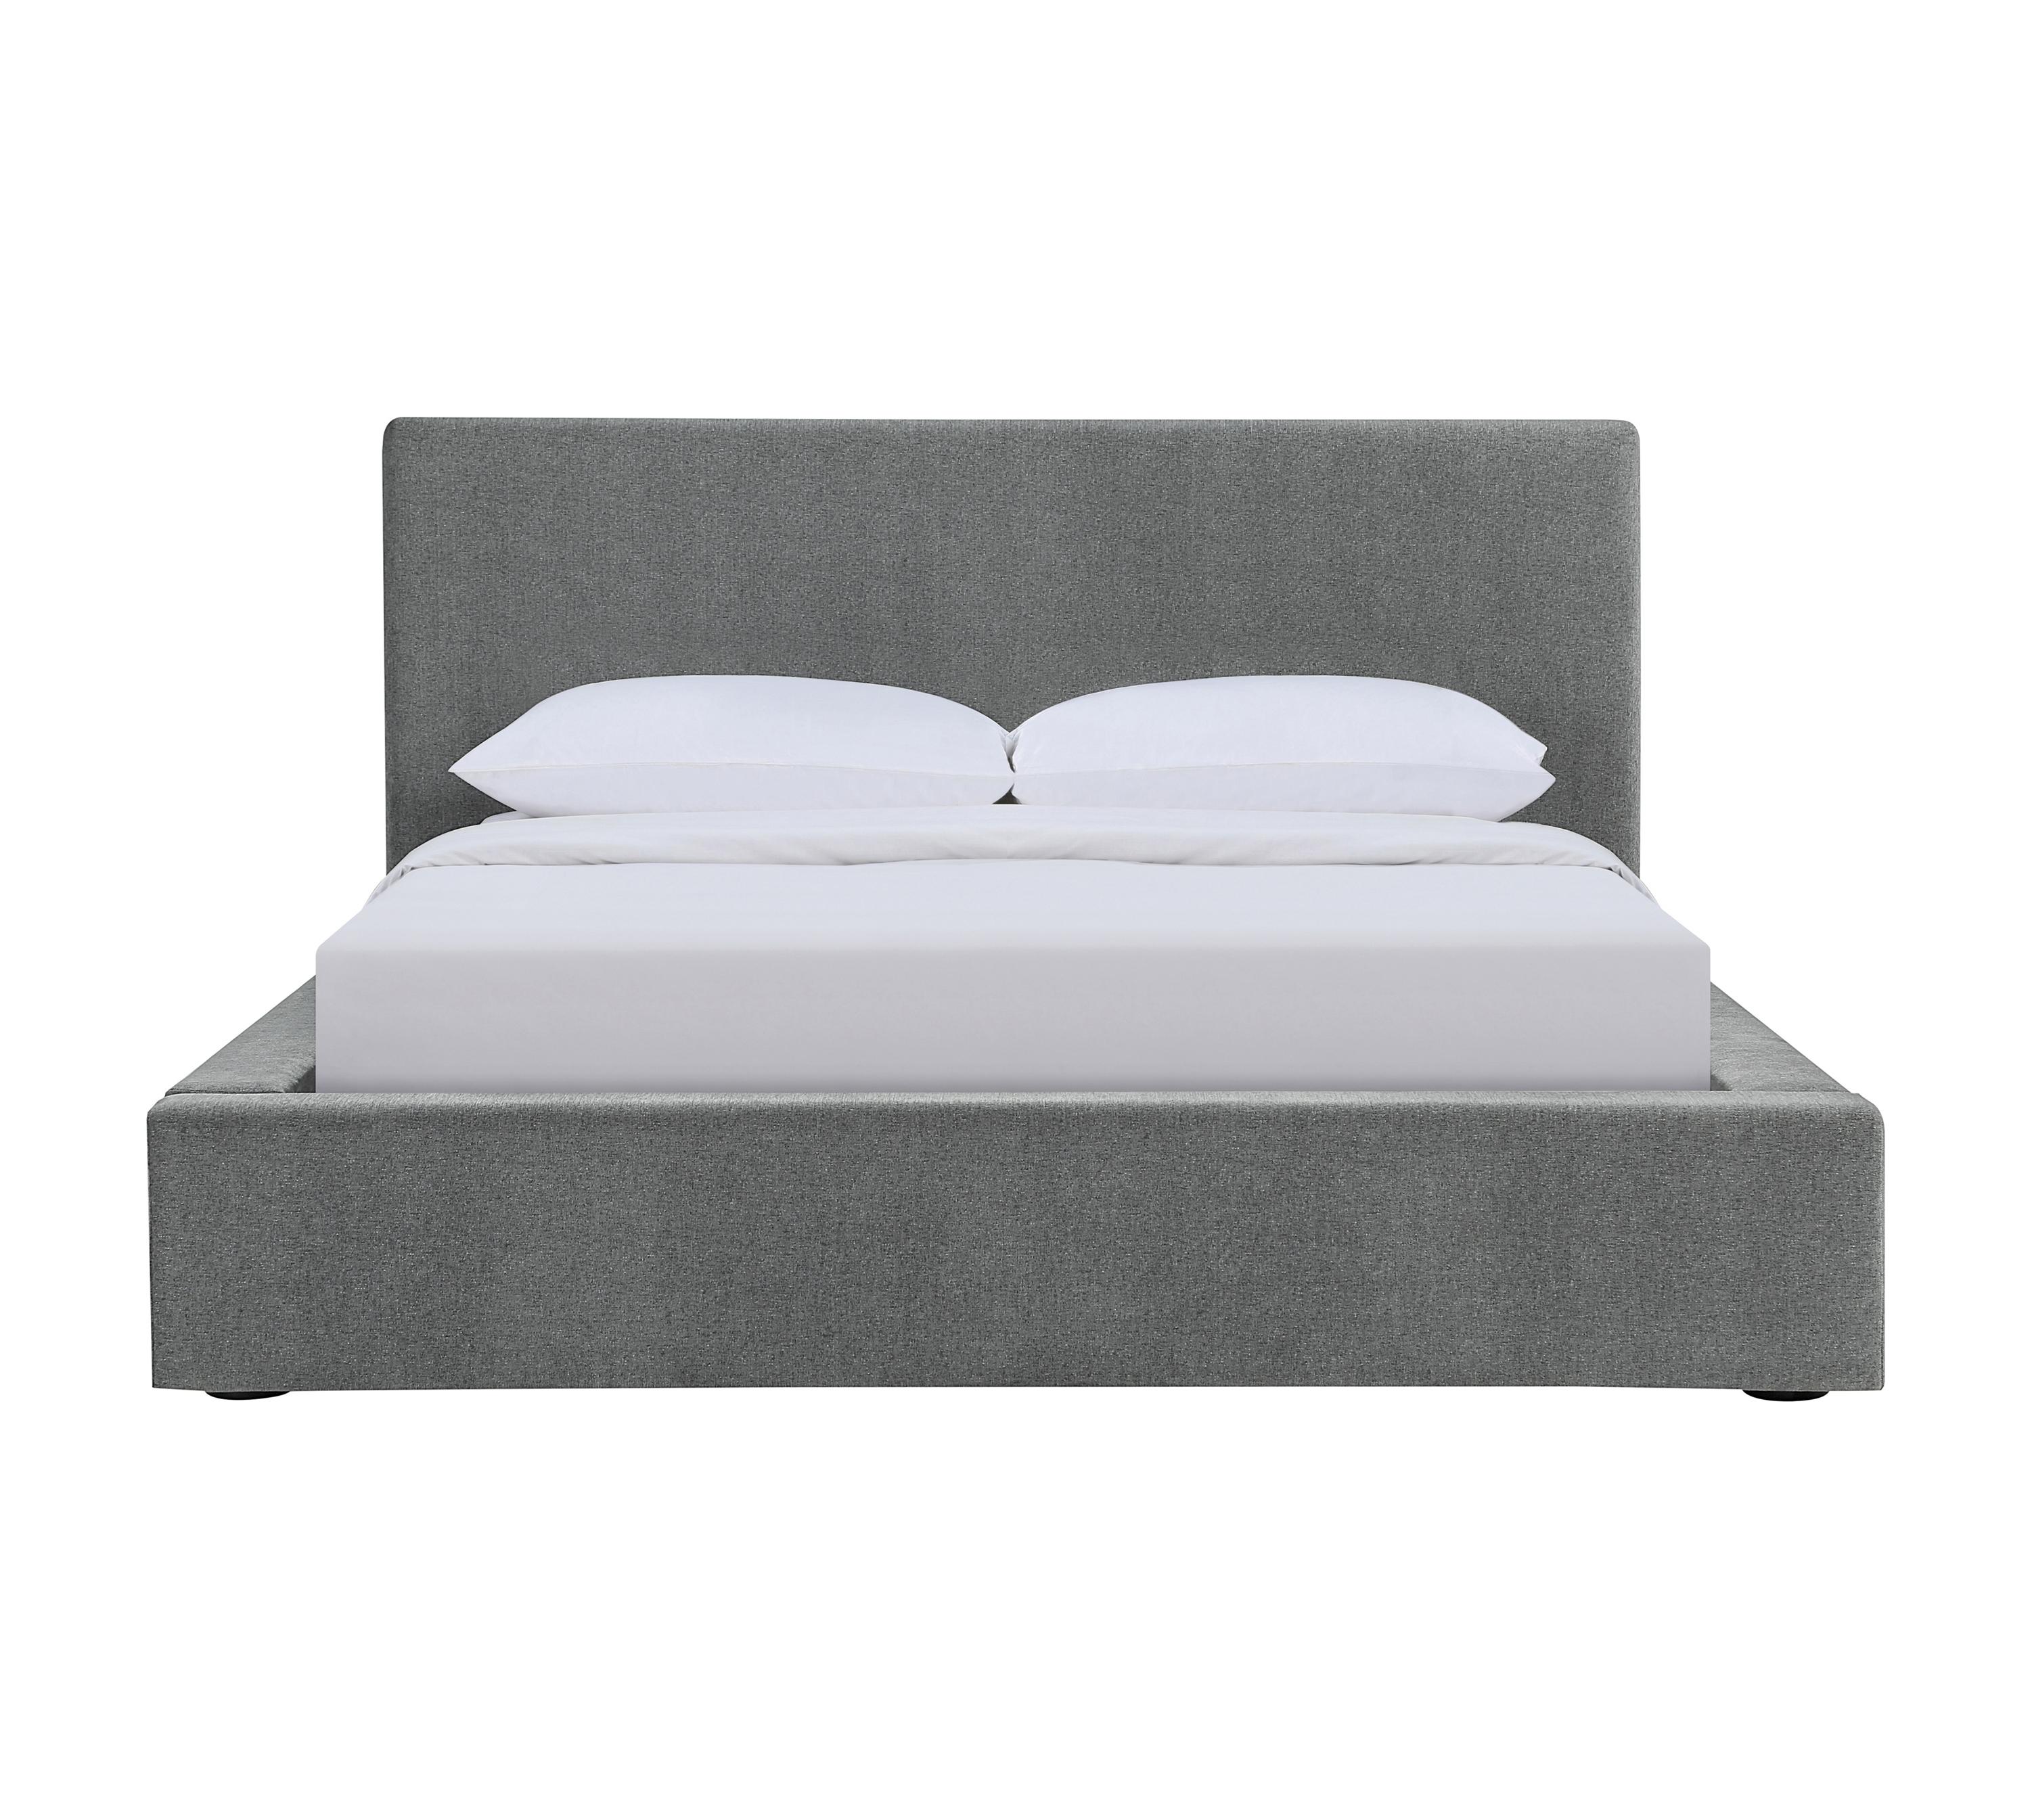 Modern Bed 316020Q Gregory 316020Q in Graphite 